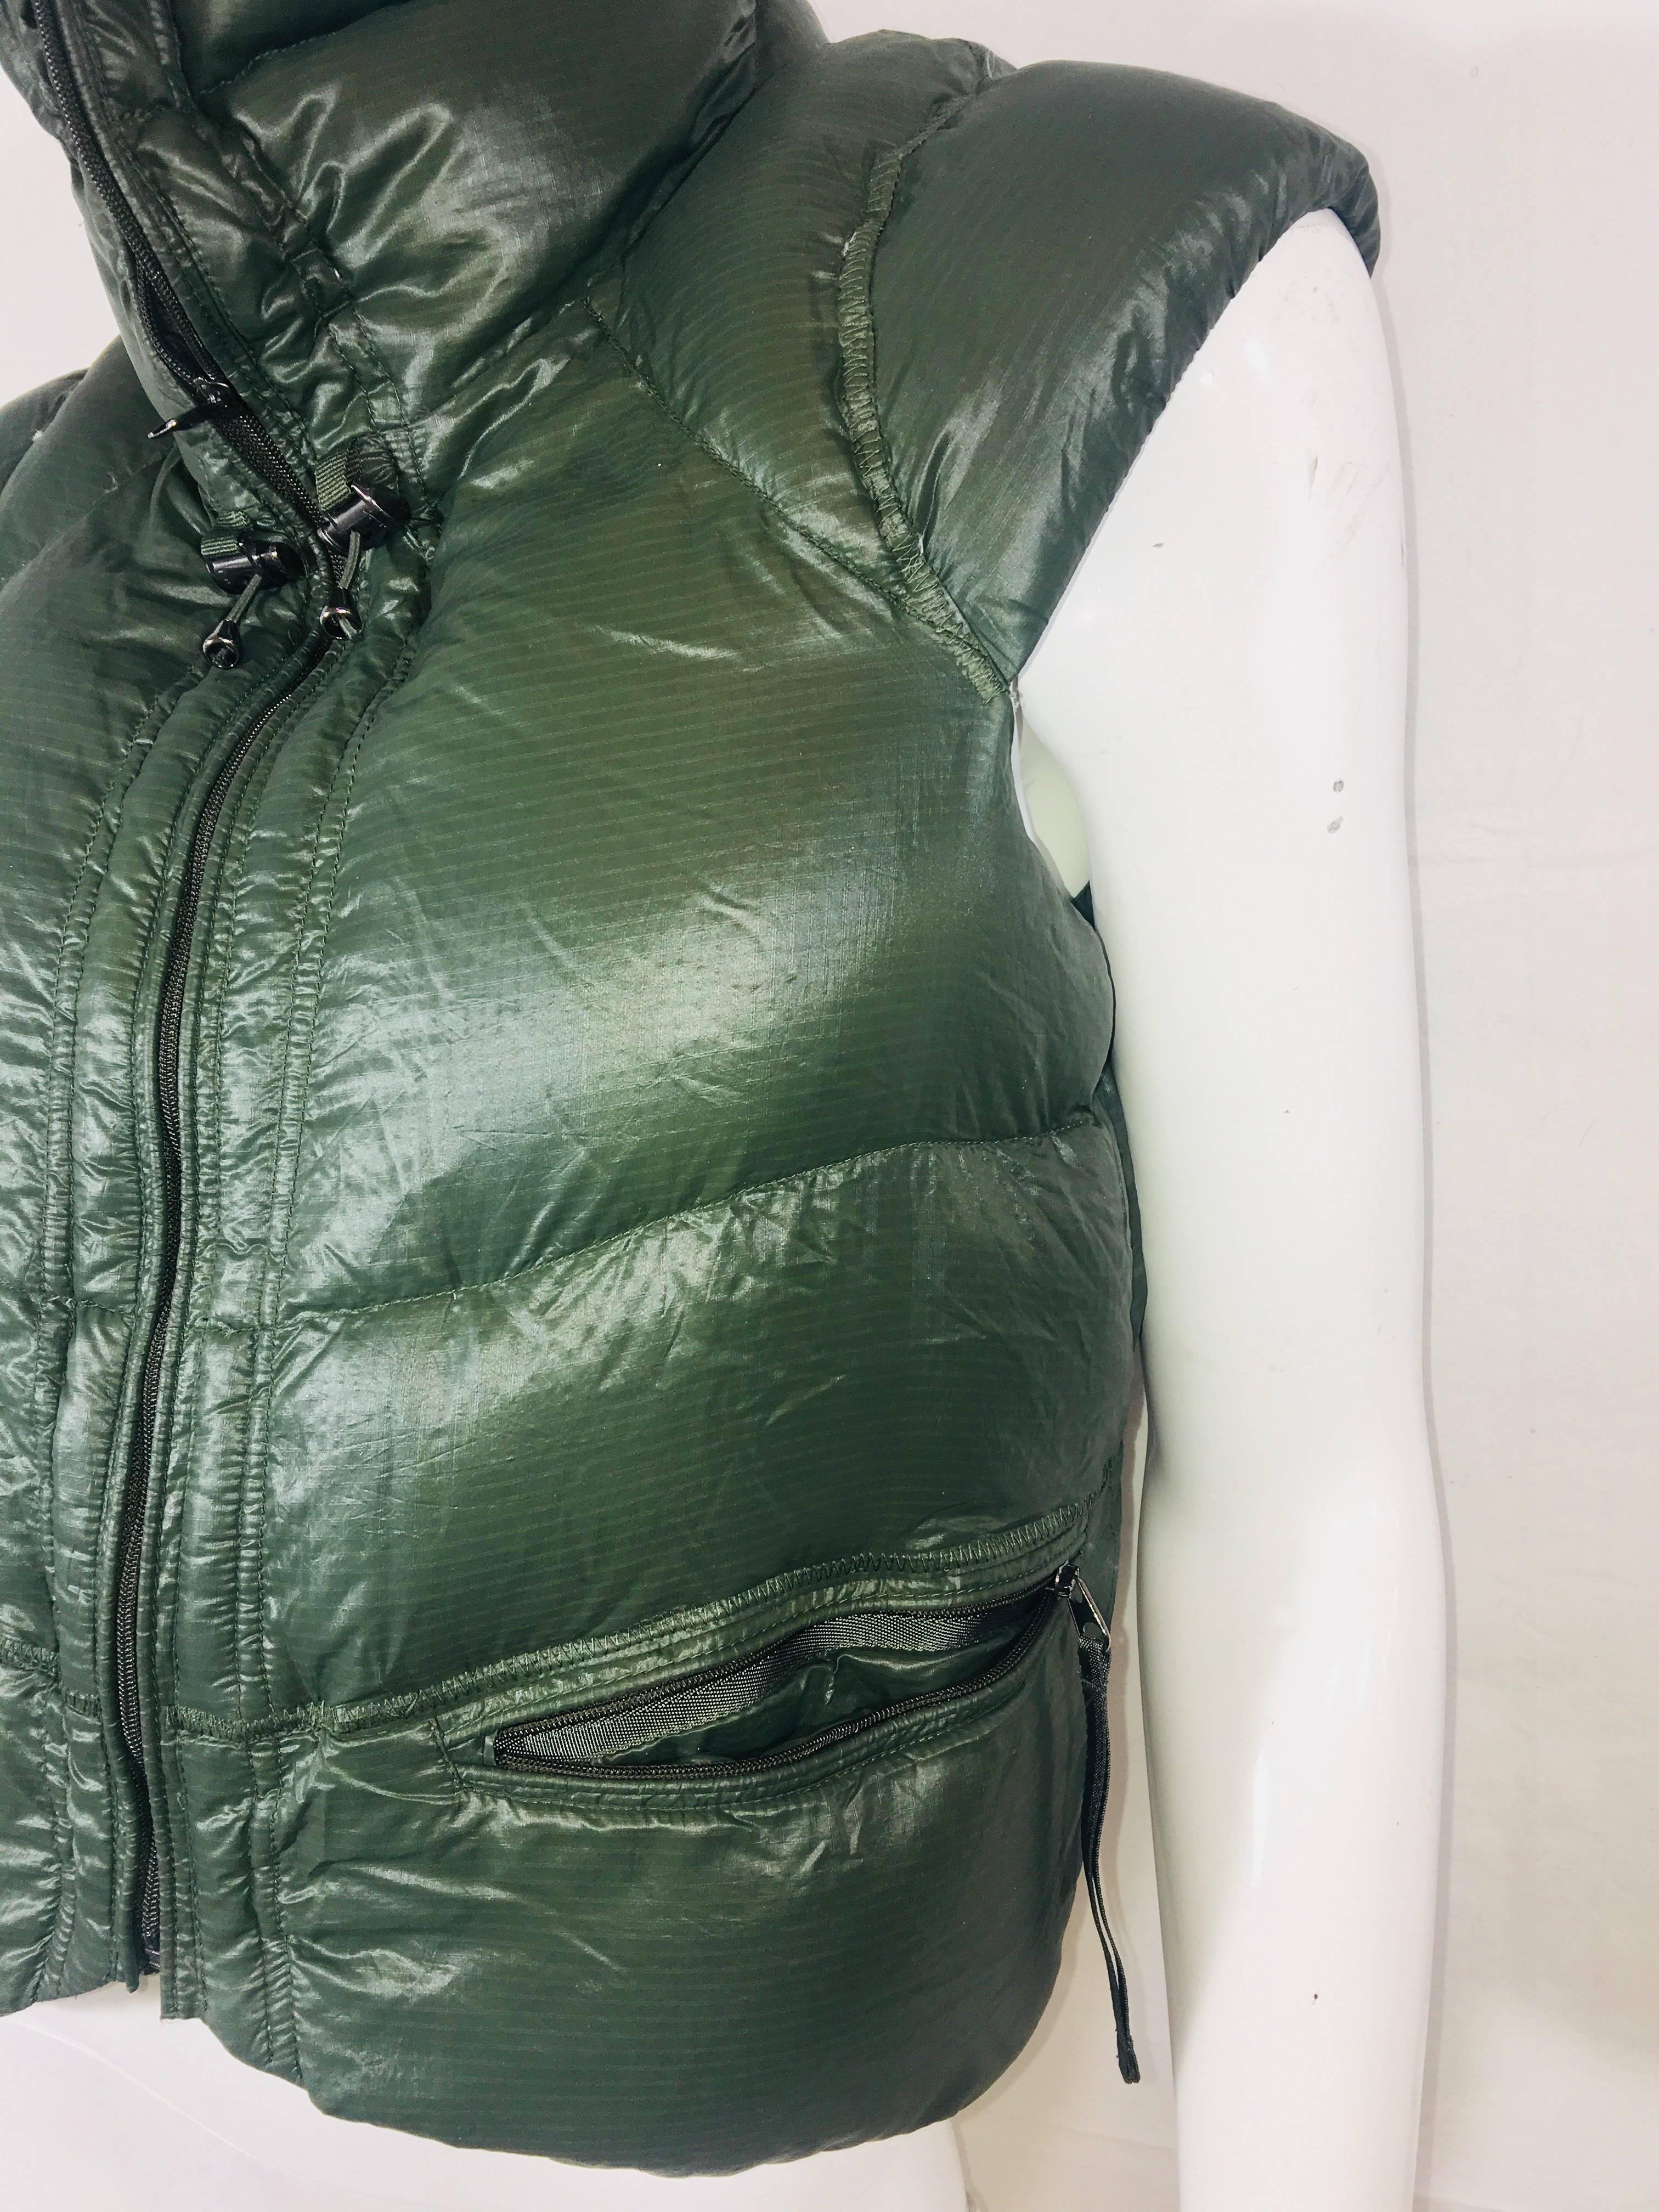 RLX Ralph Lauren Puffer Vest in Olive Nylon with Zip Front, Double Exterior Pockets, Inside Pocket and Drawstring Collar.